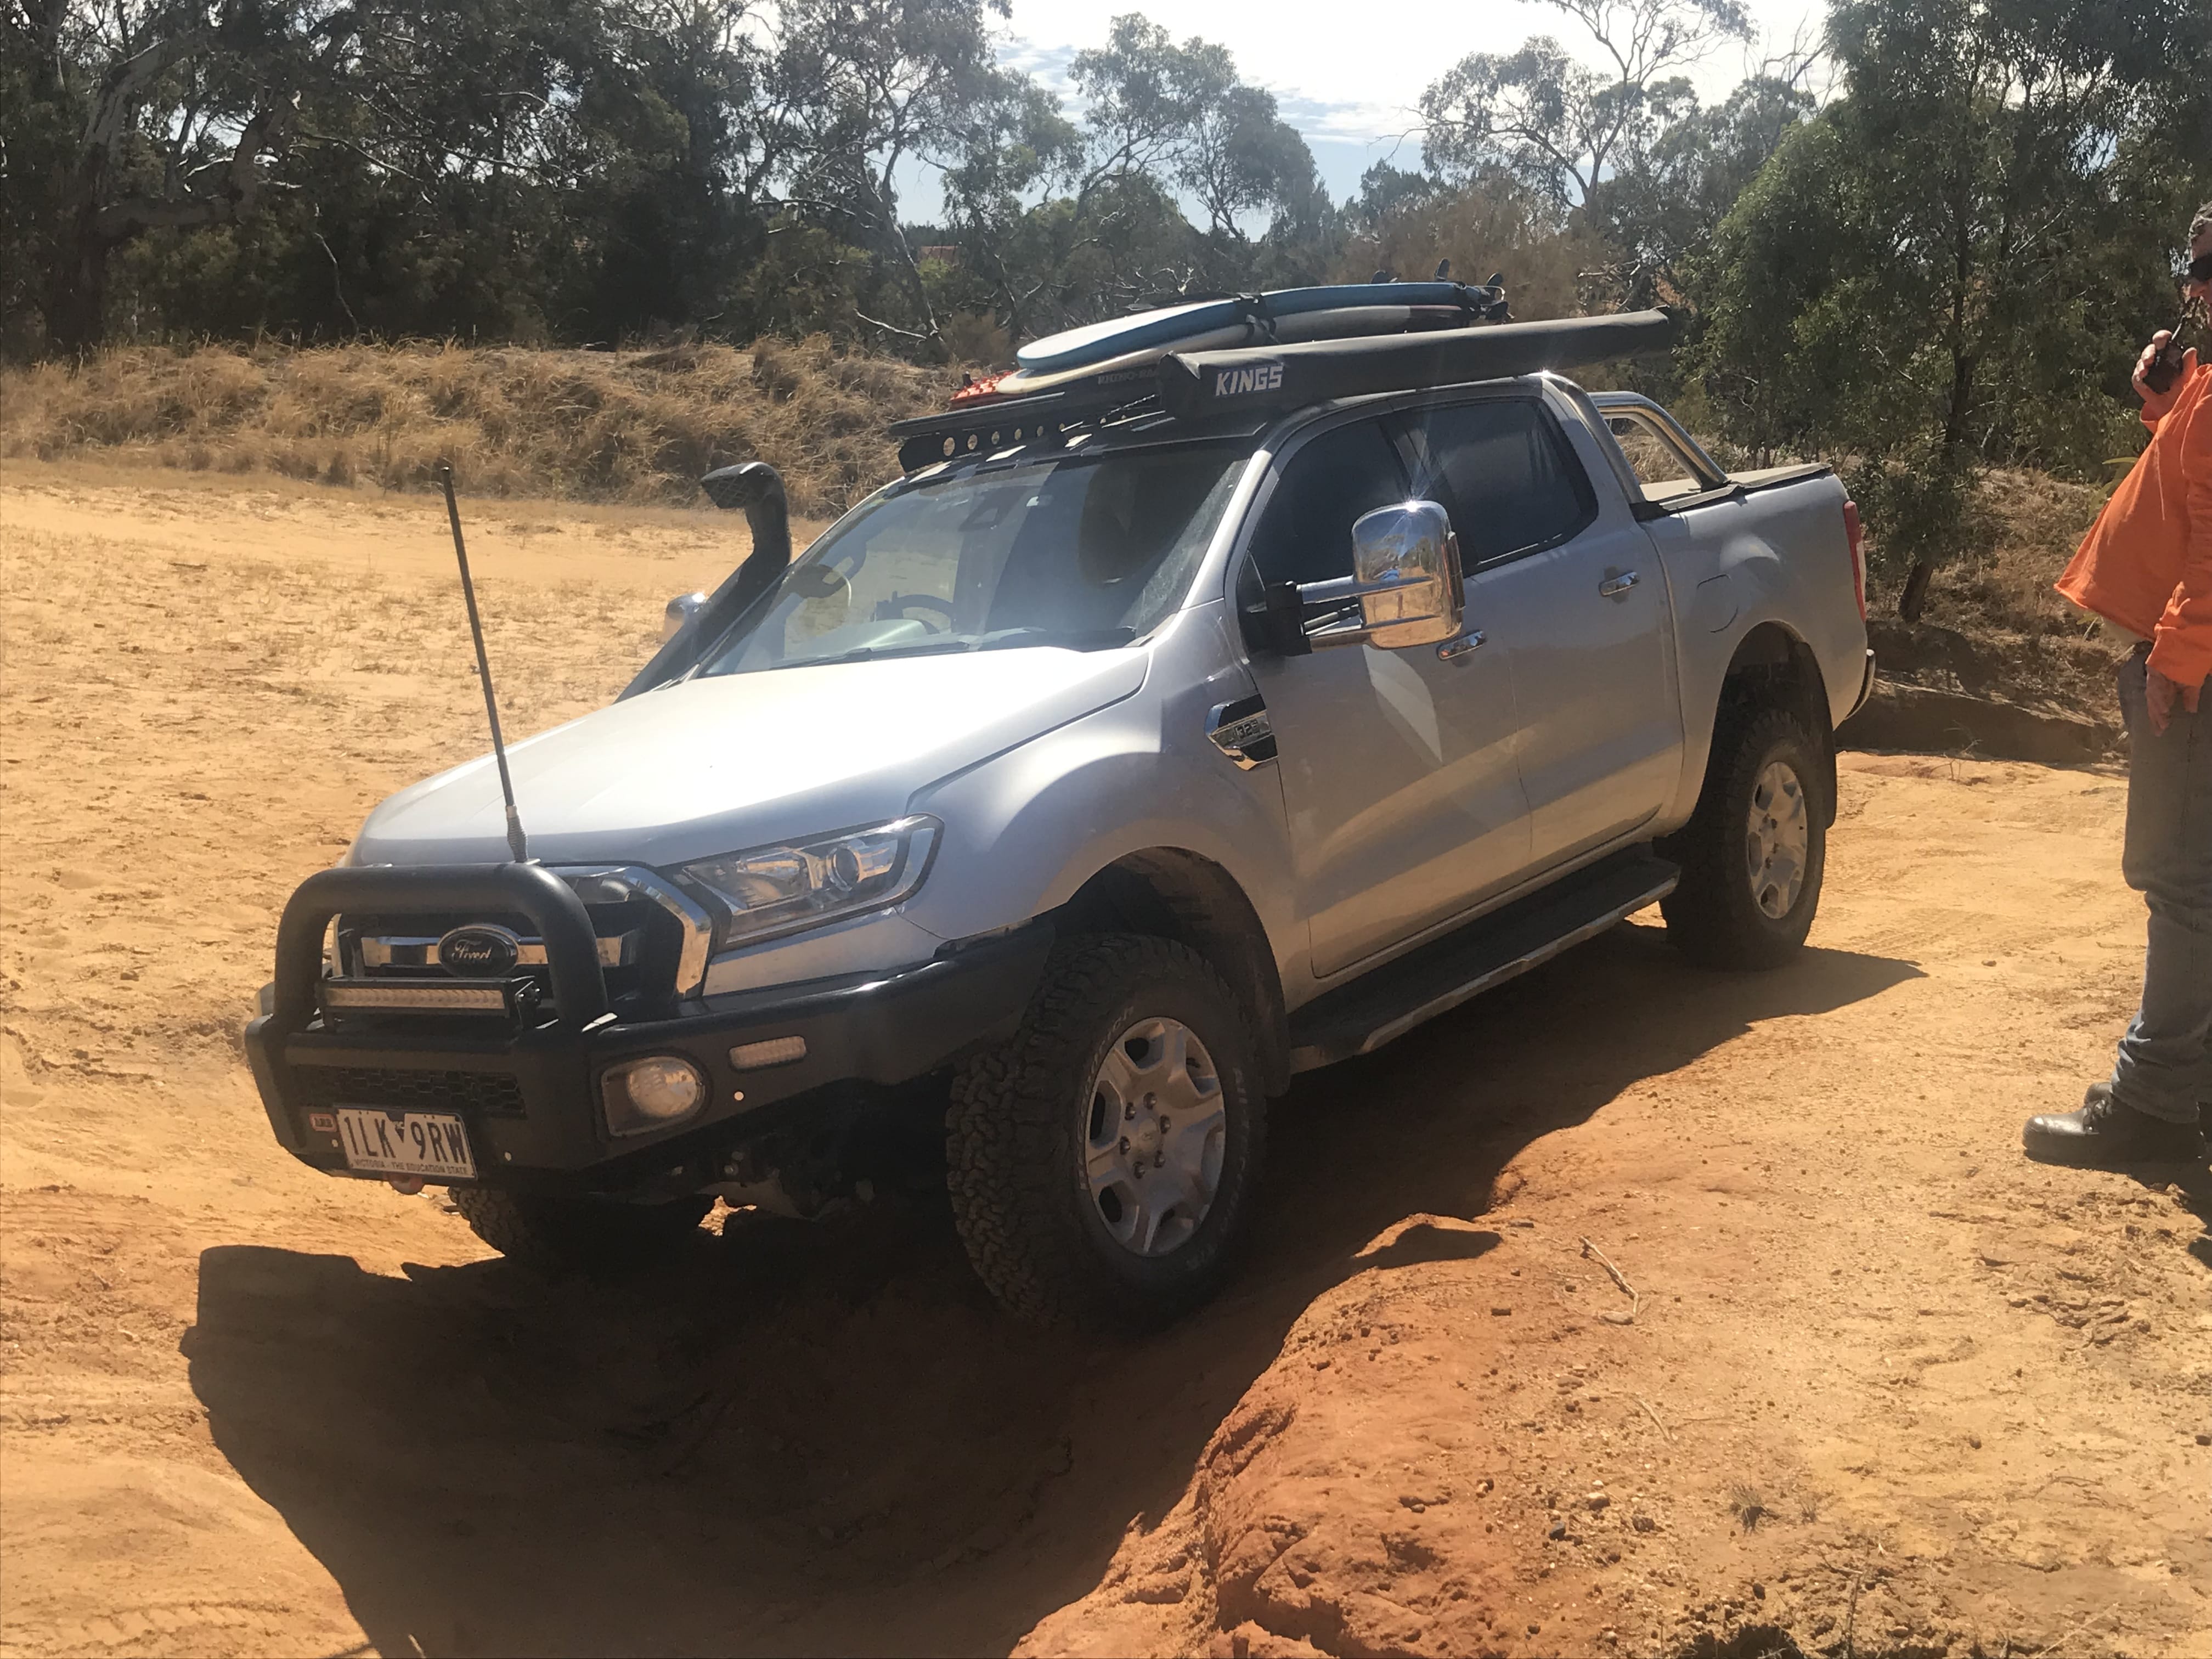 4WD course, Adventure 4WD